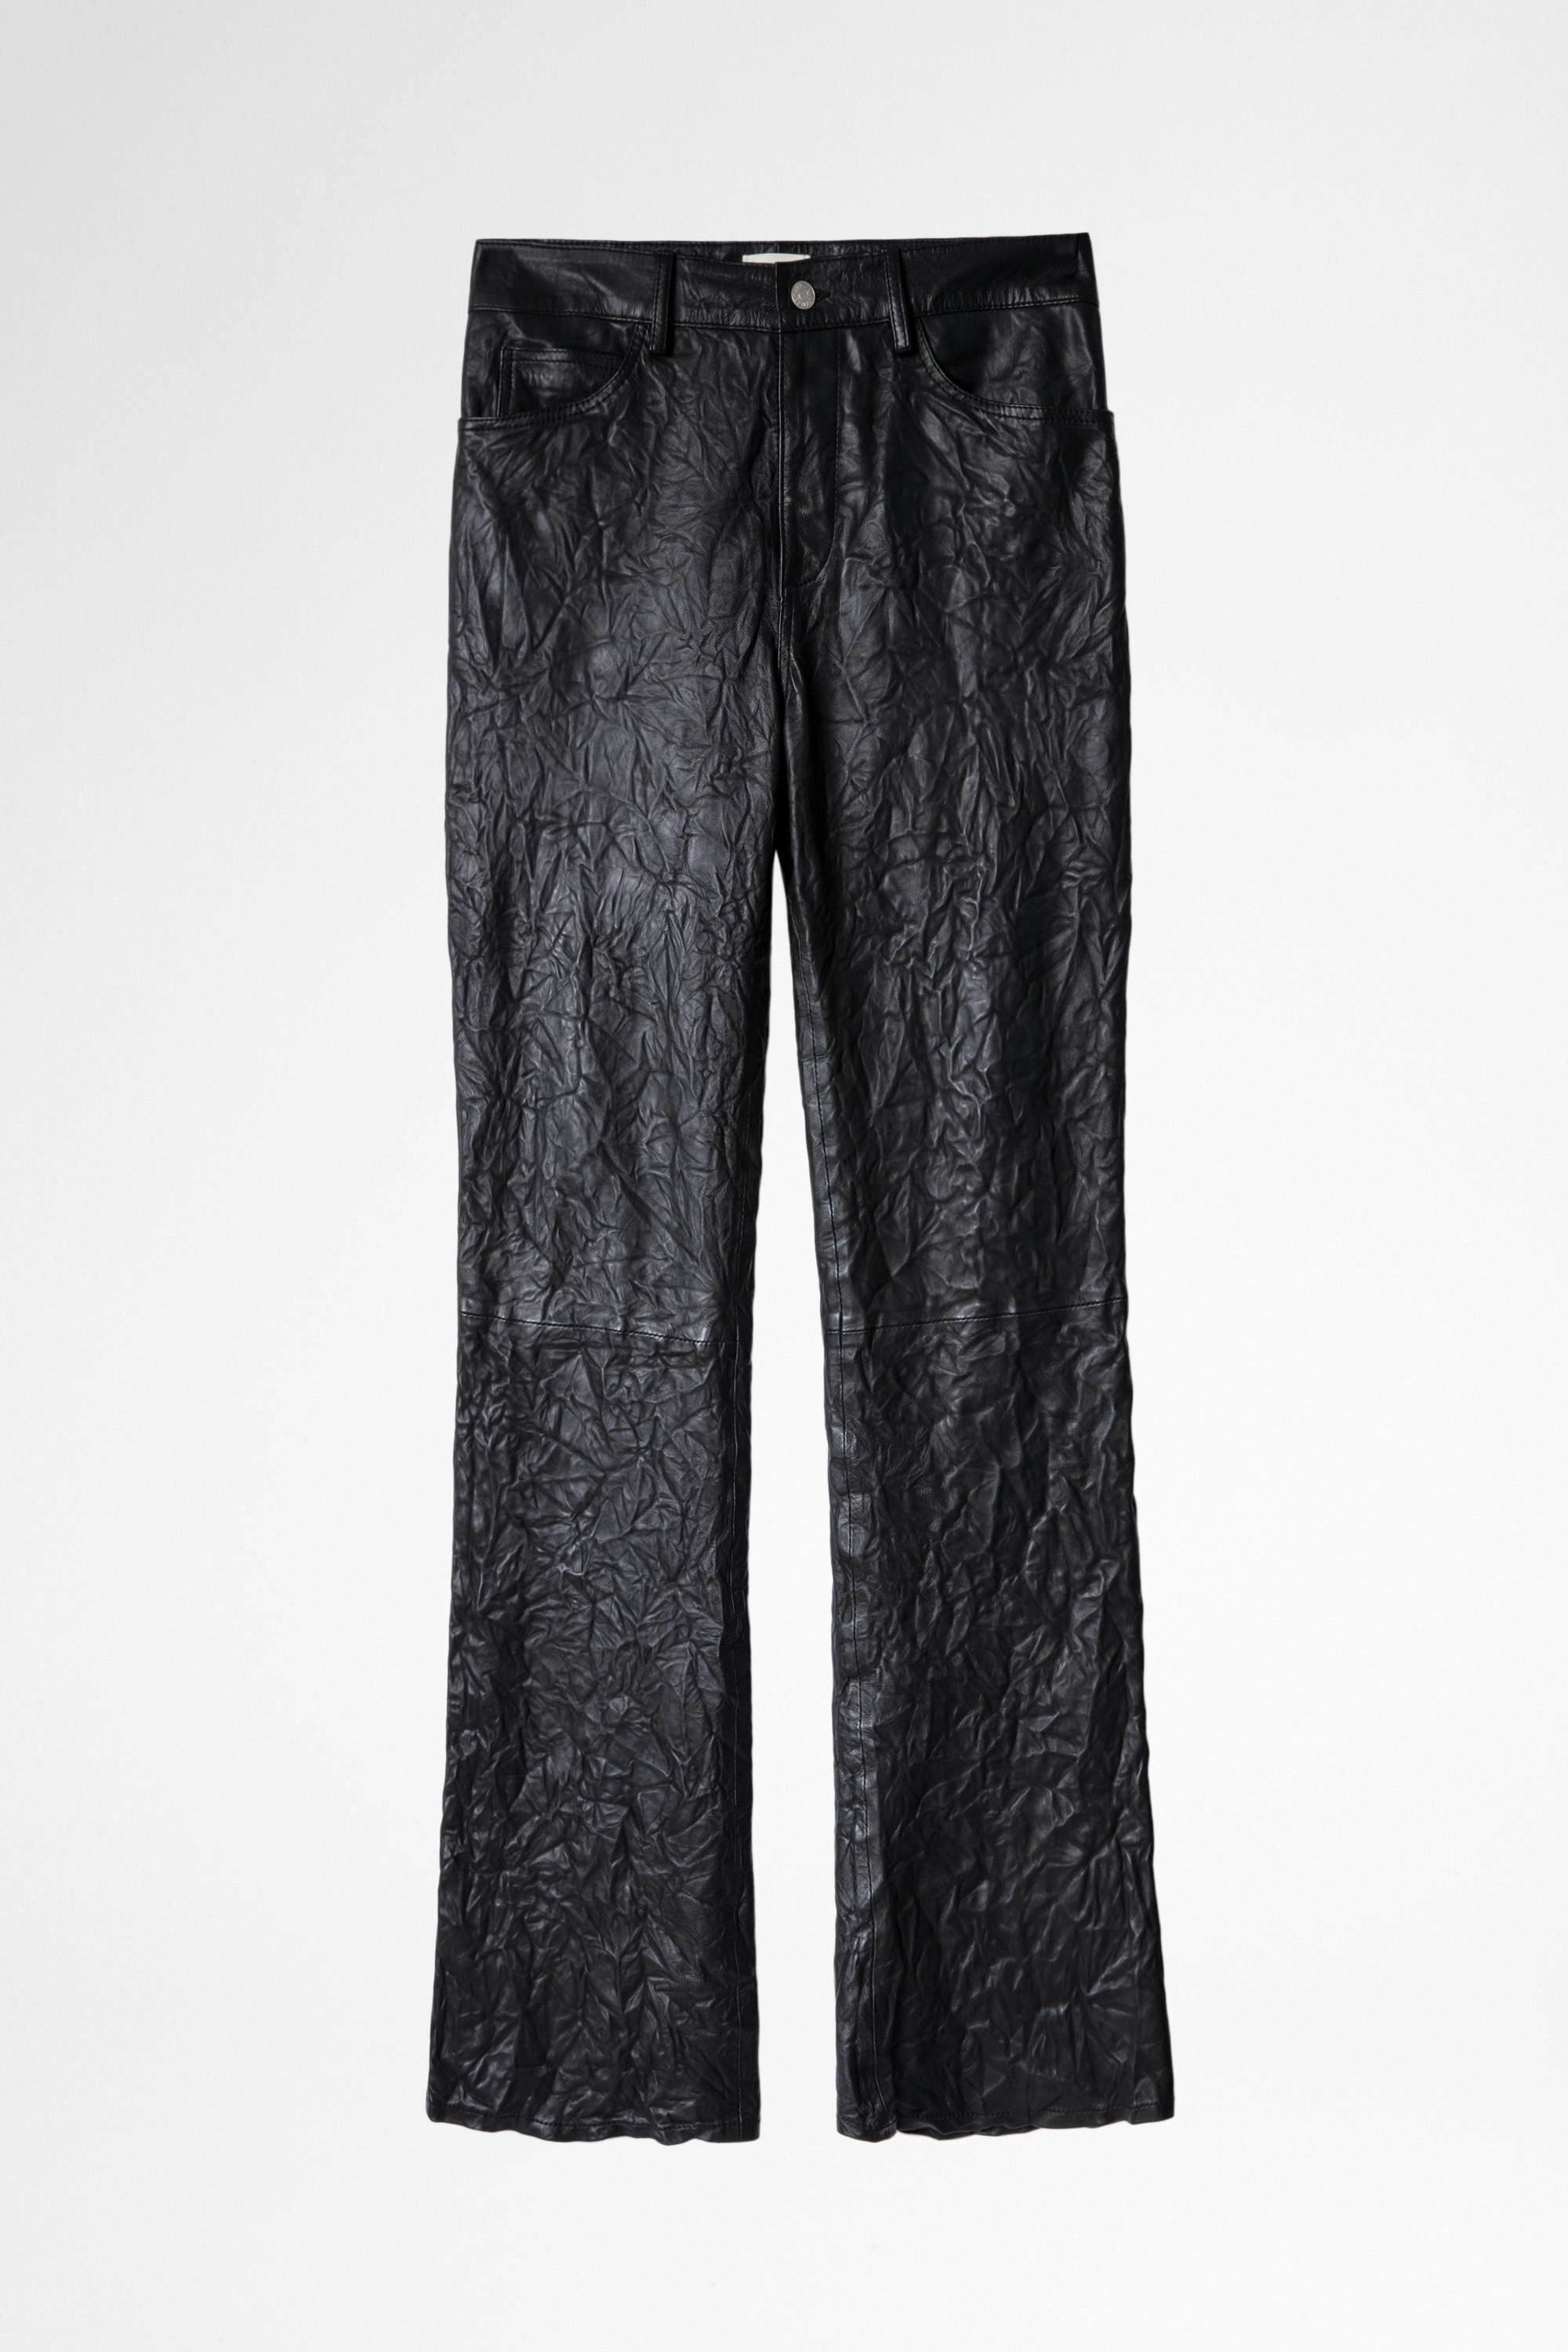 Pistol Trousers Crinkled Leather